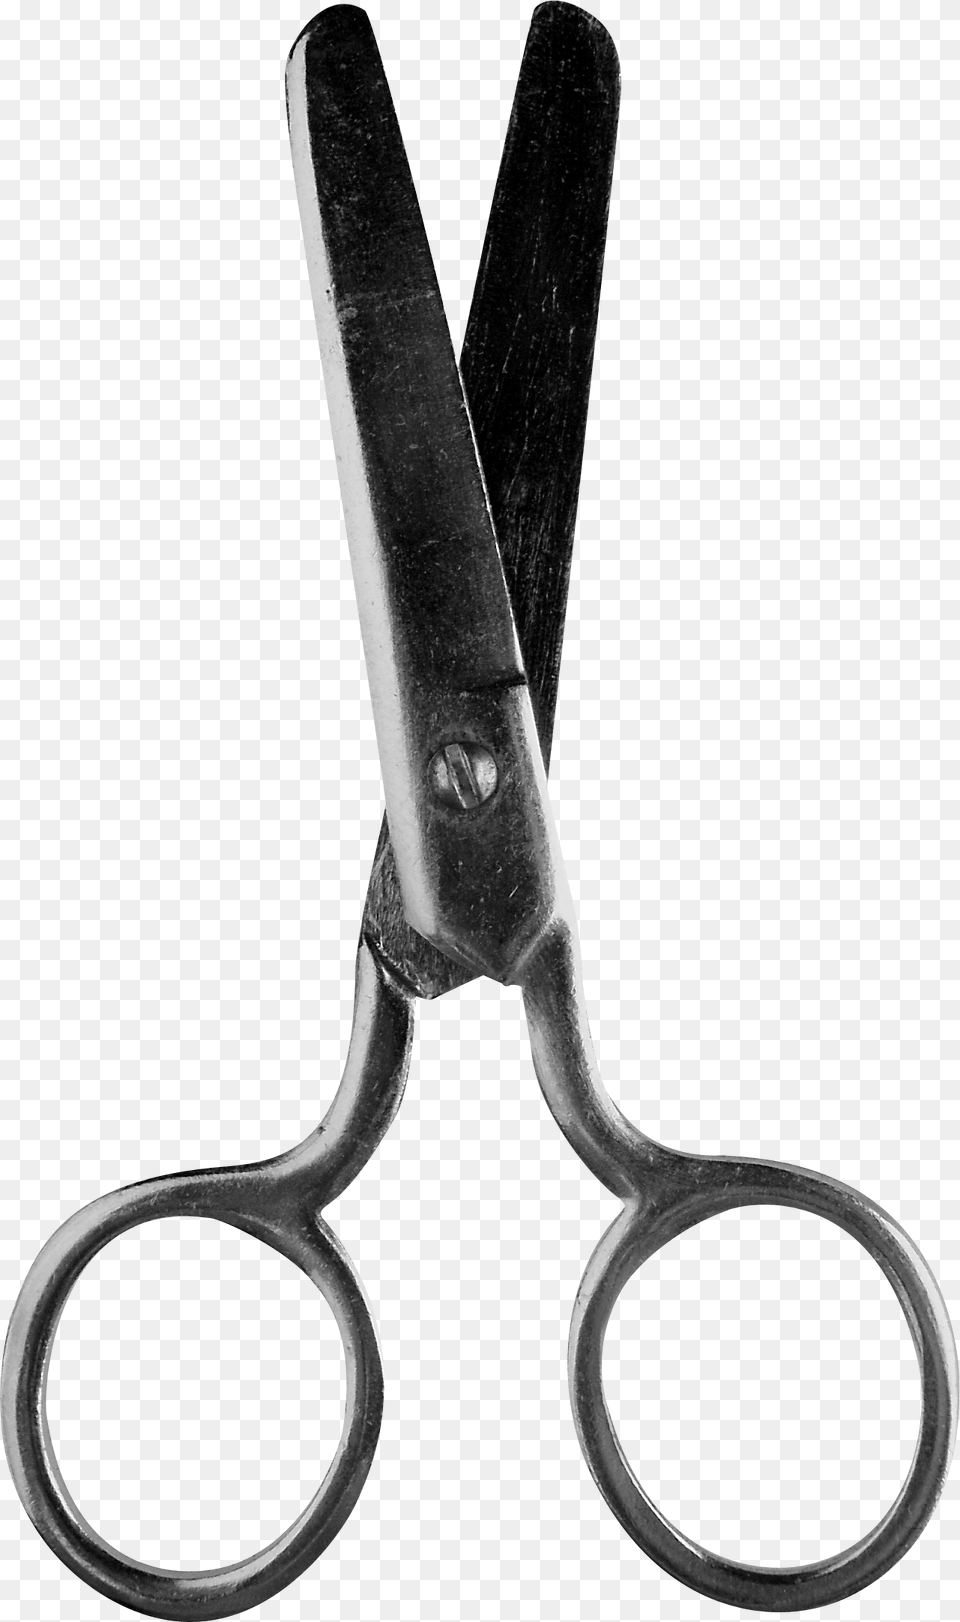 Free Download Of Scissors Transparent File Scissors, Blade, Shears, Weapon Png